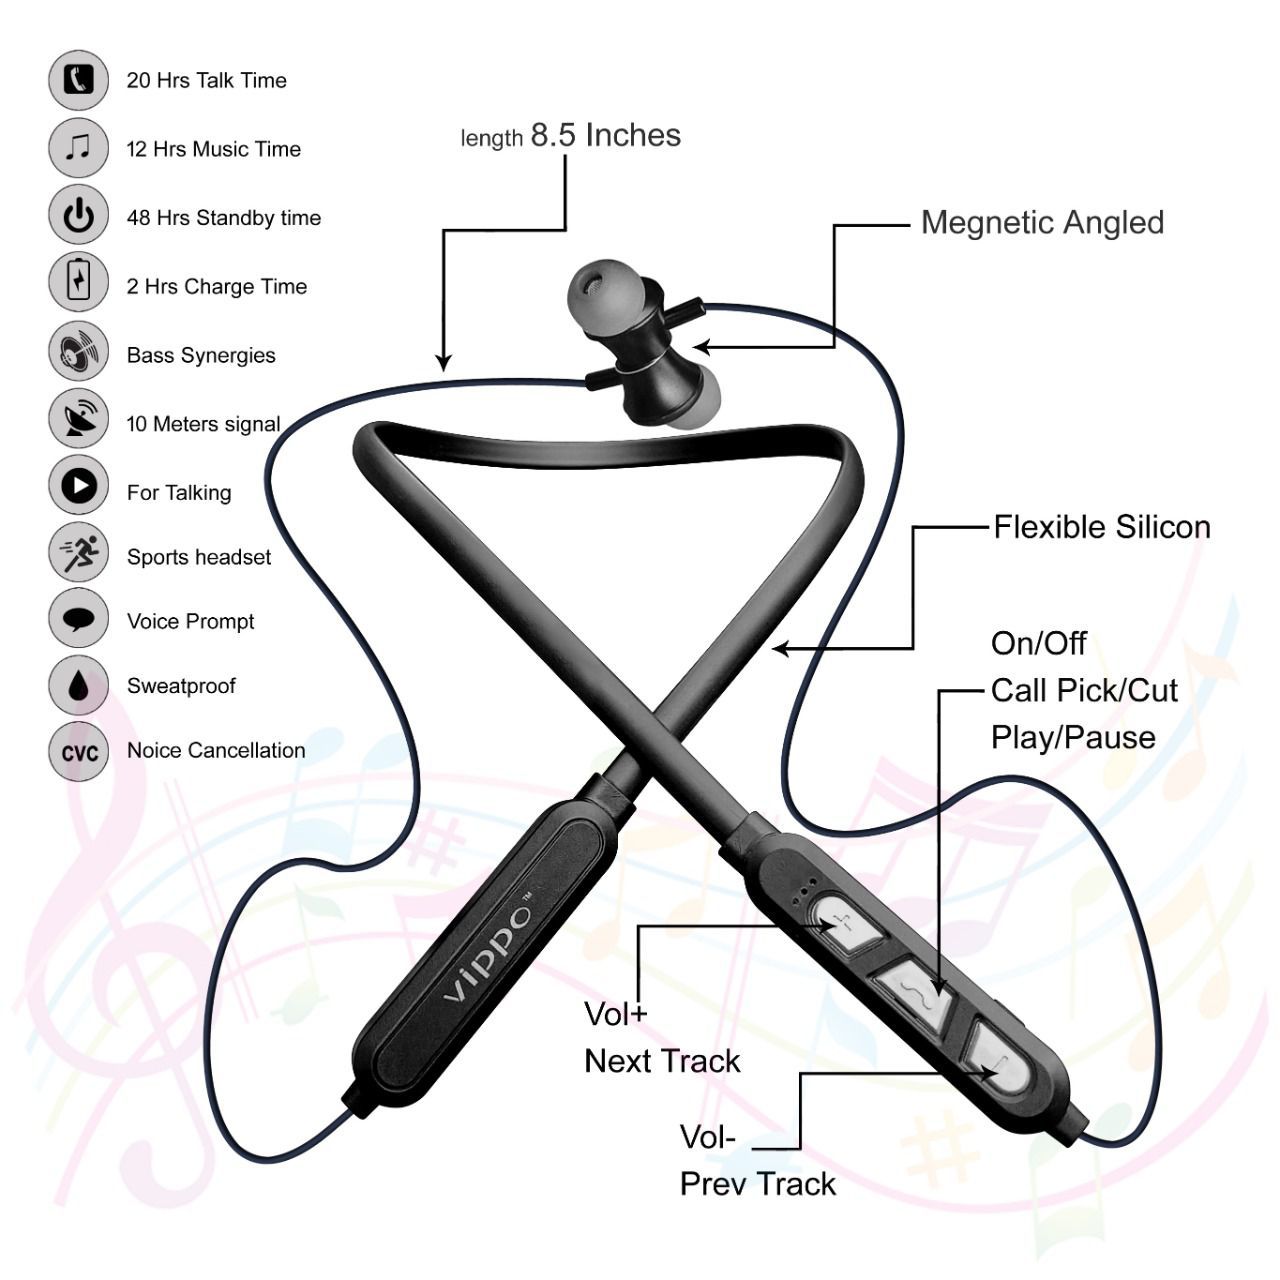 VIPPO VNB-941 (30 HOURS Music Playback BATTERY  Compatible ALL ANDROID AND IOS SYSTEM 5.0 Bluetooth ) Wireless SPORT HEADSET Magnetic Neckband With Bass Headphones/Earphones